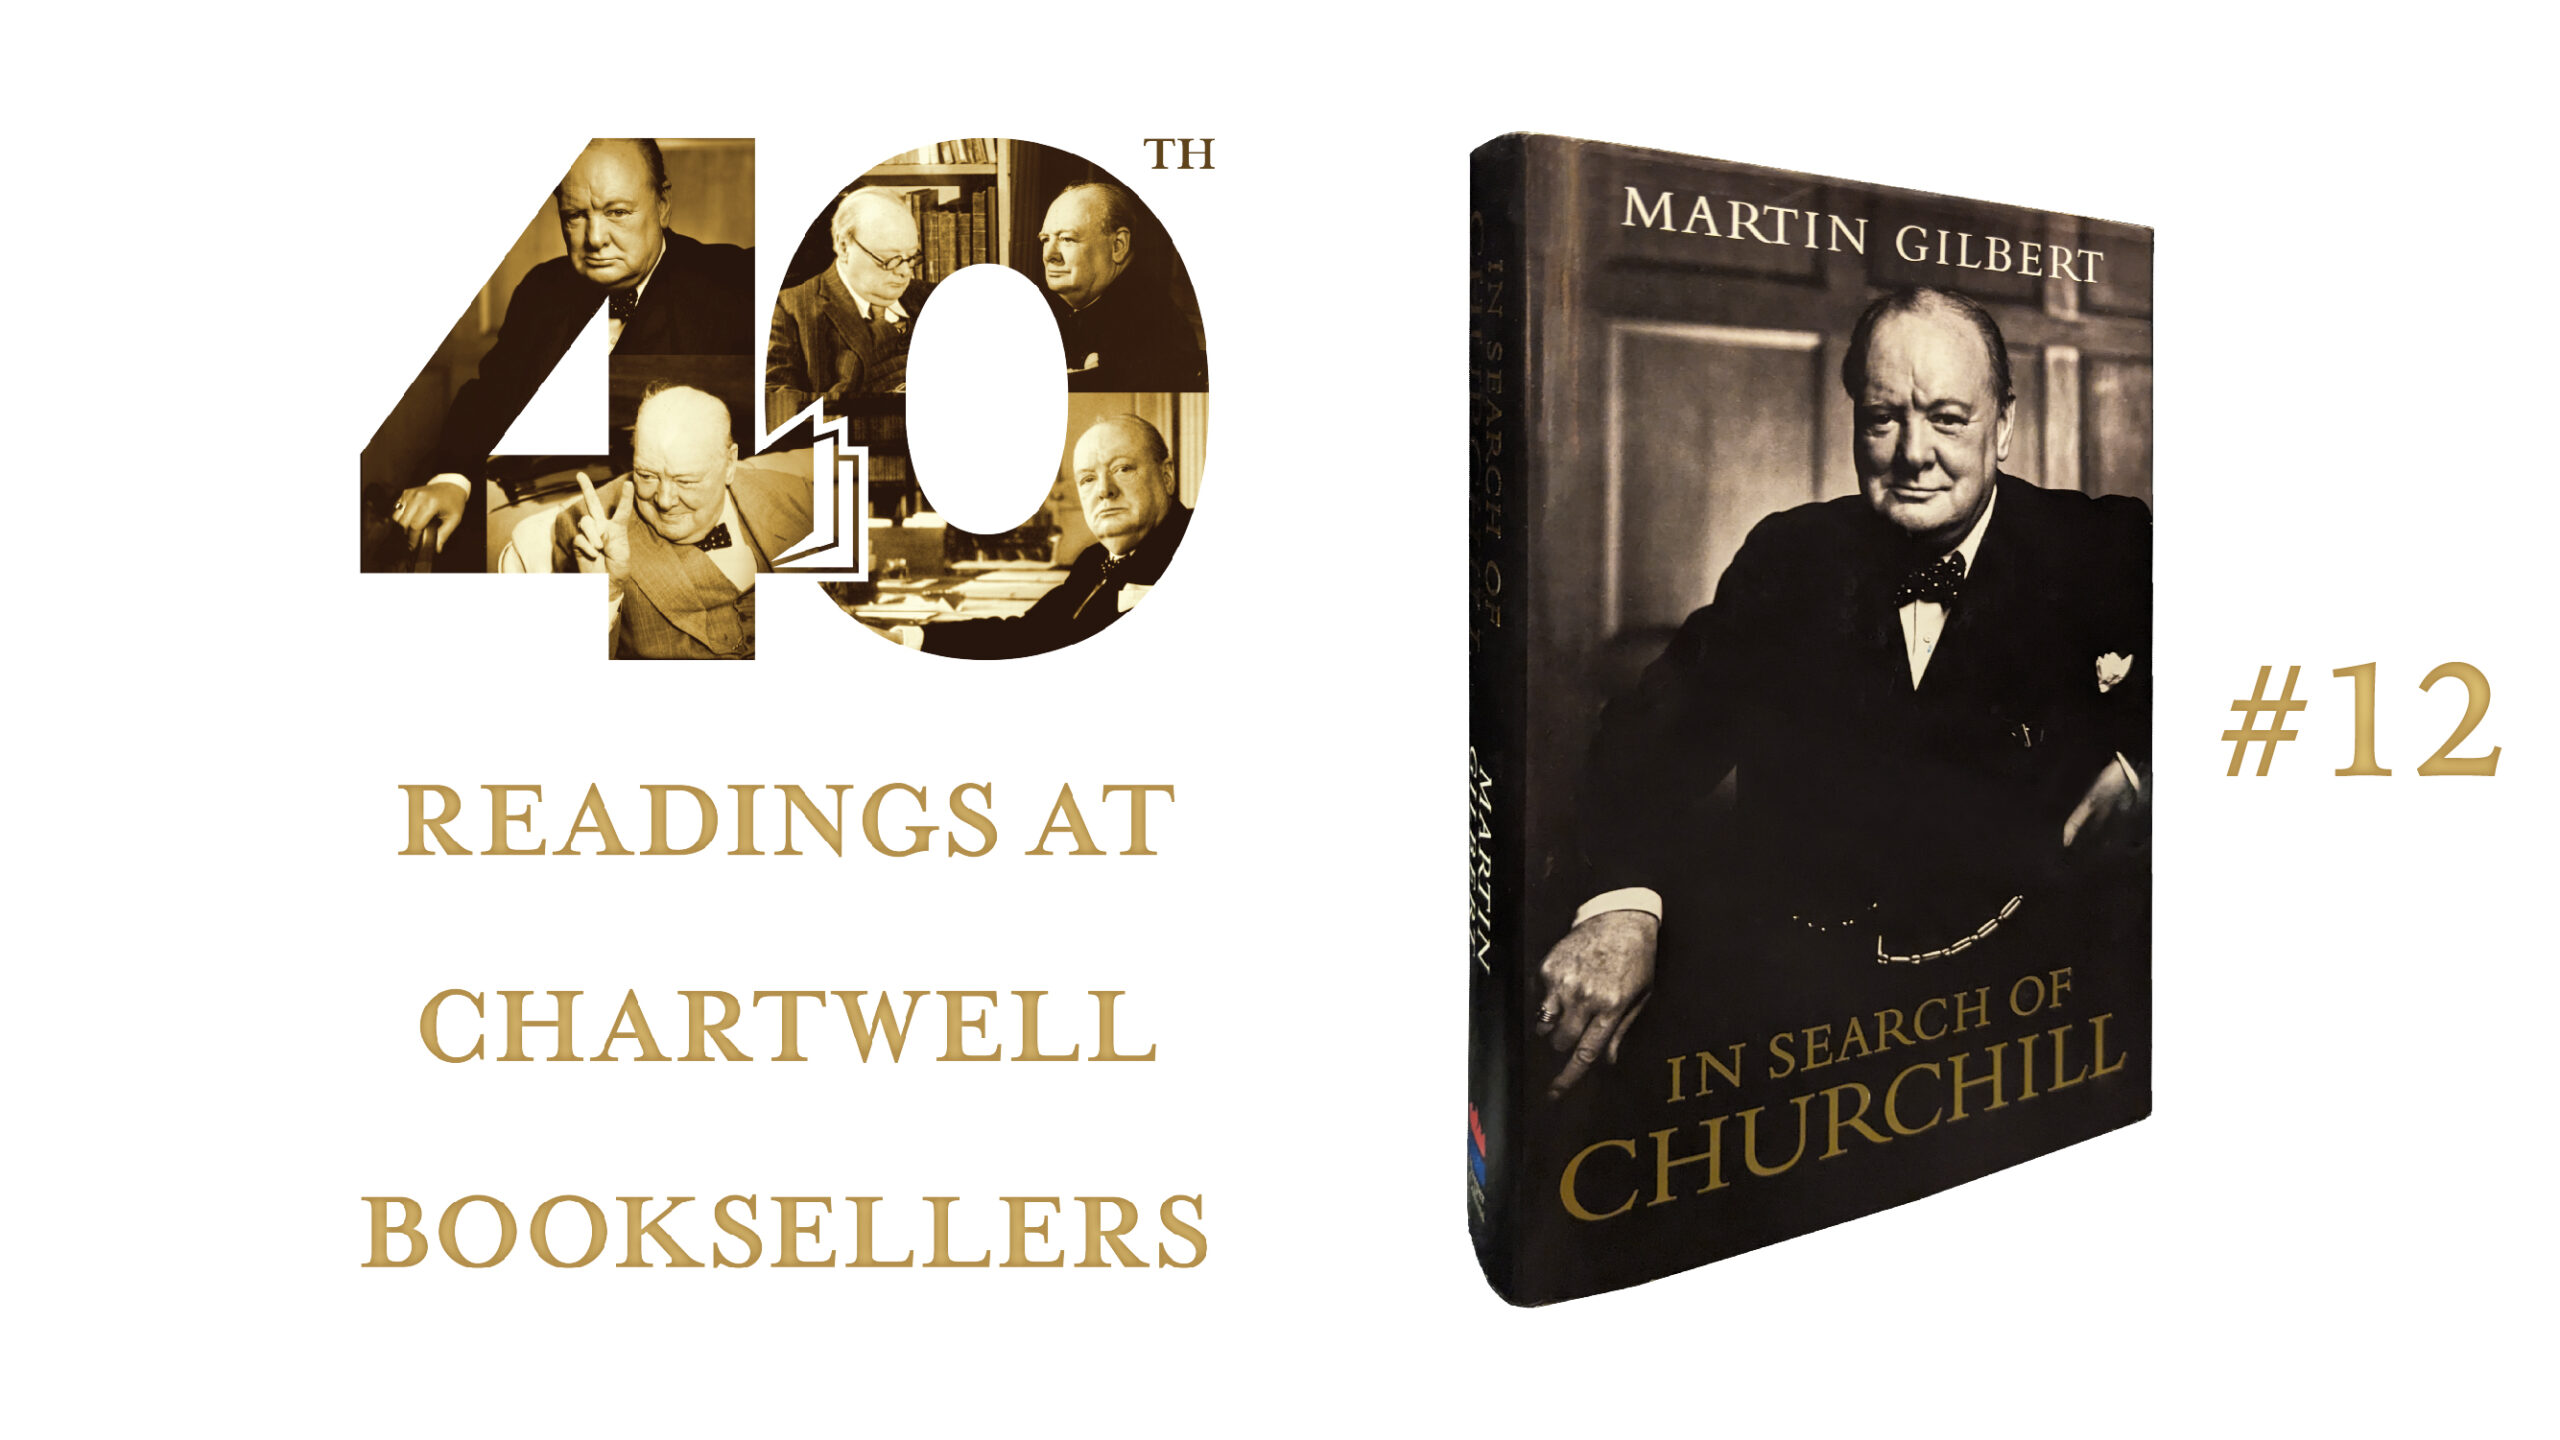 WATCH ESTHER, LADY GILBERT READ “IN SEARCH OF CHURCHILL” BY SIR MARTIN GILBERT